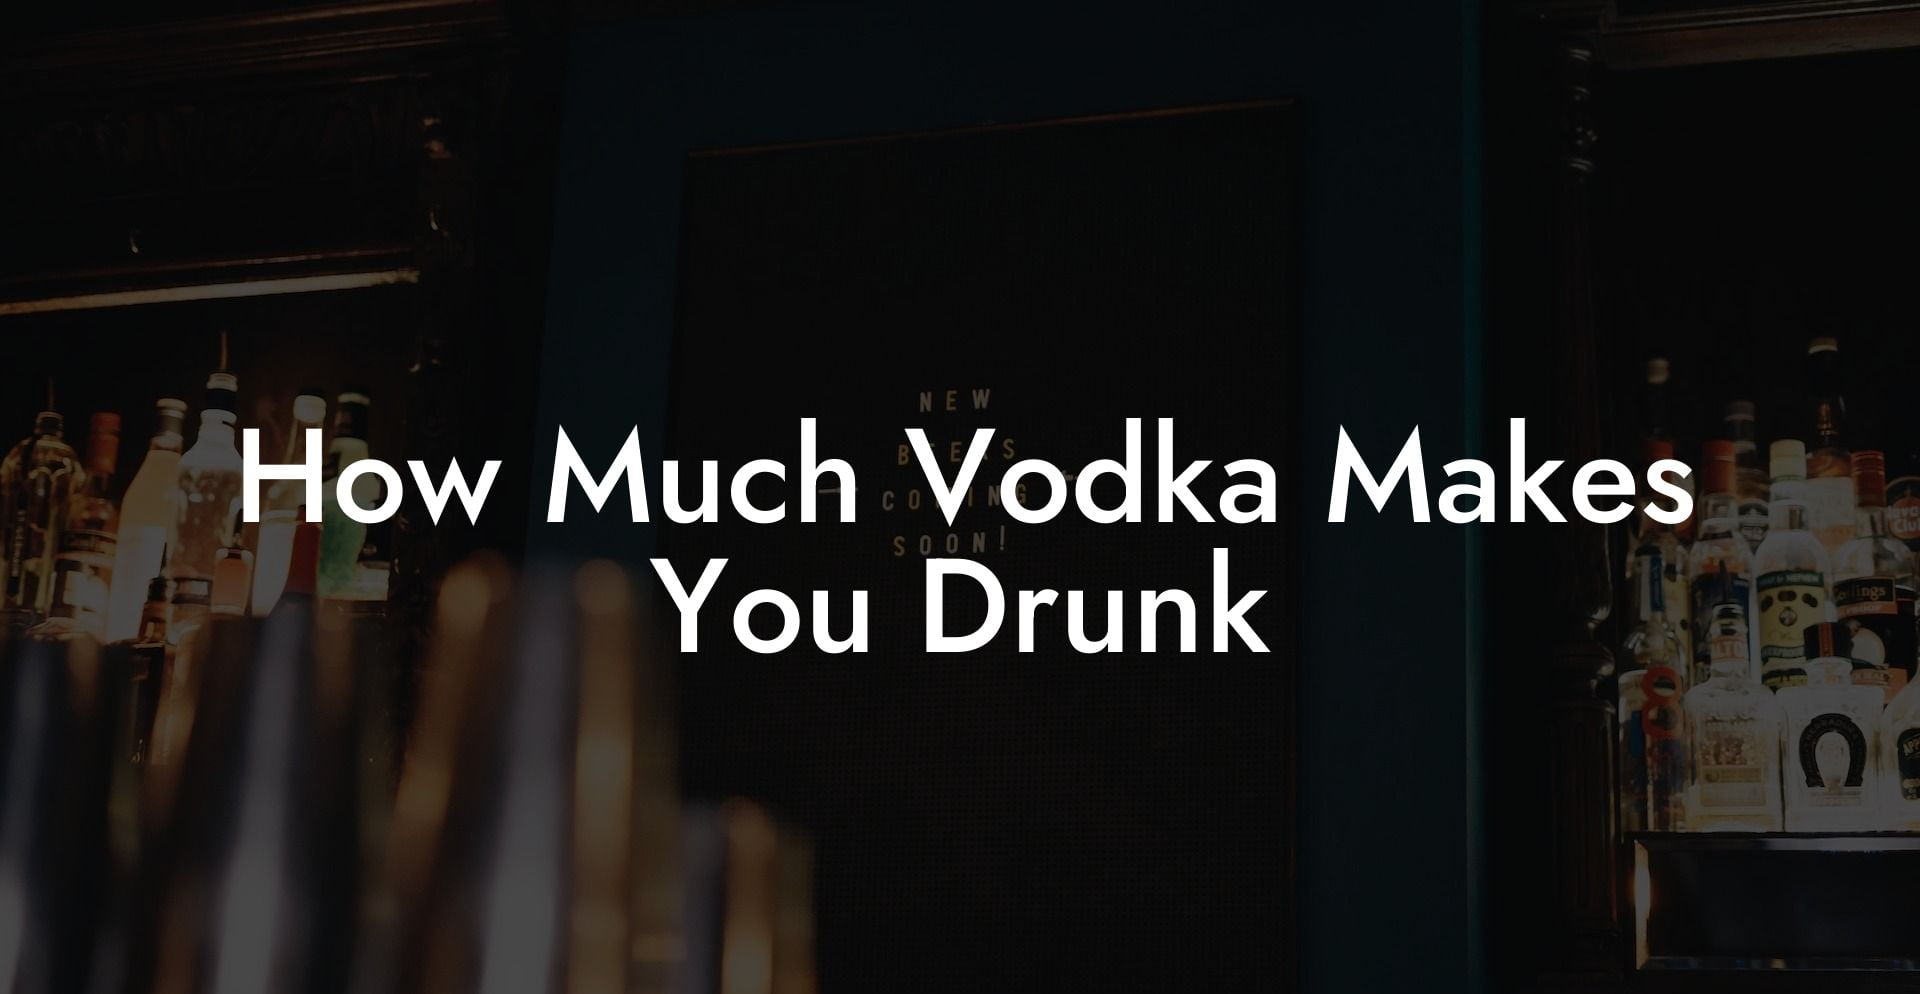 How Much Vodka Makes You Drunk